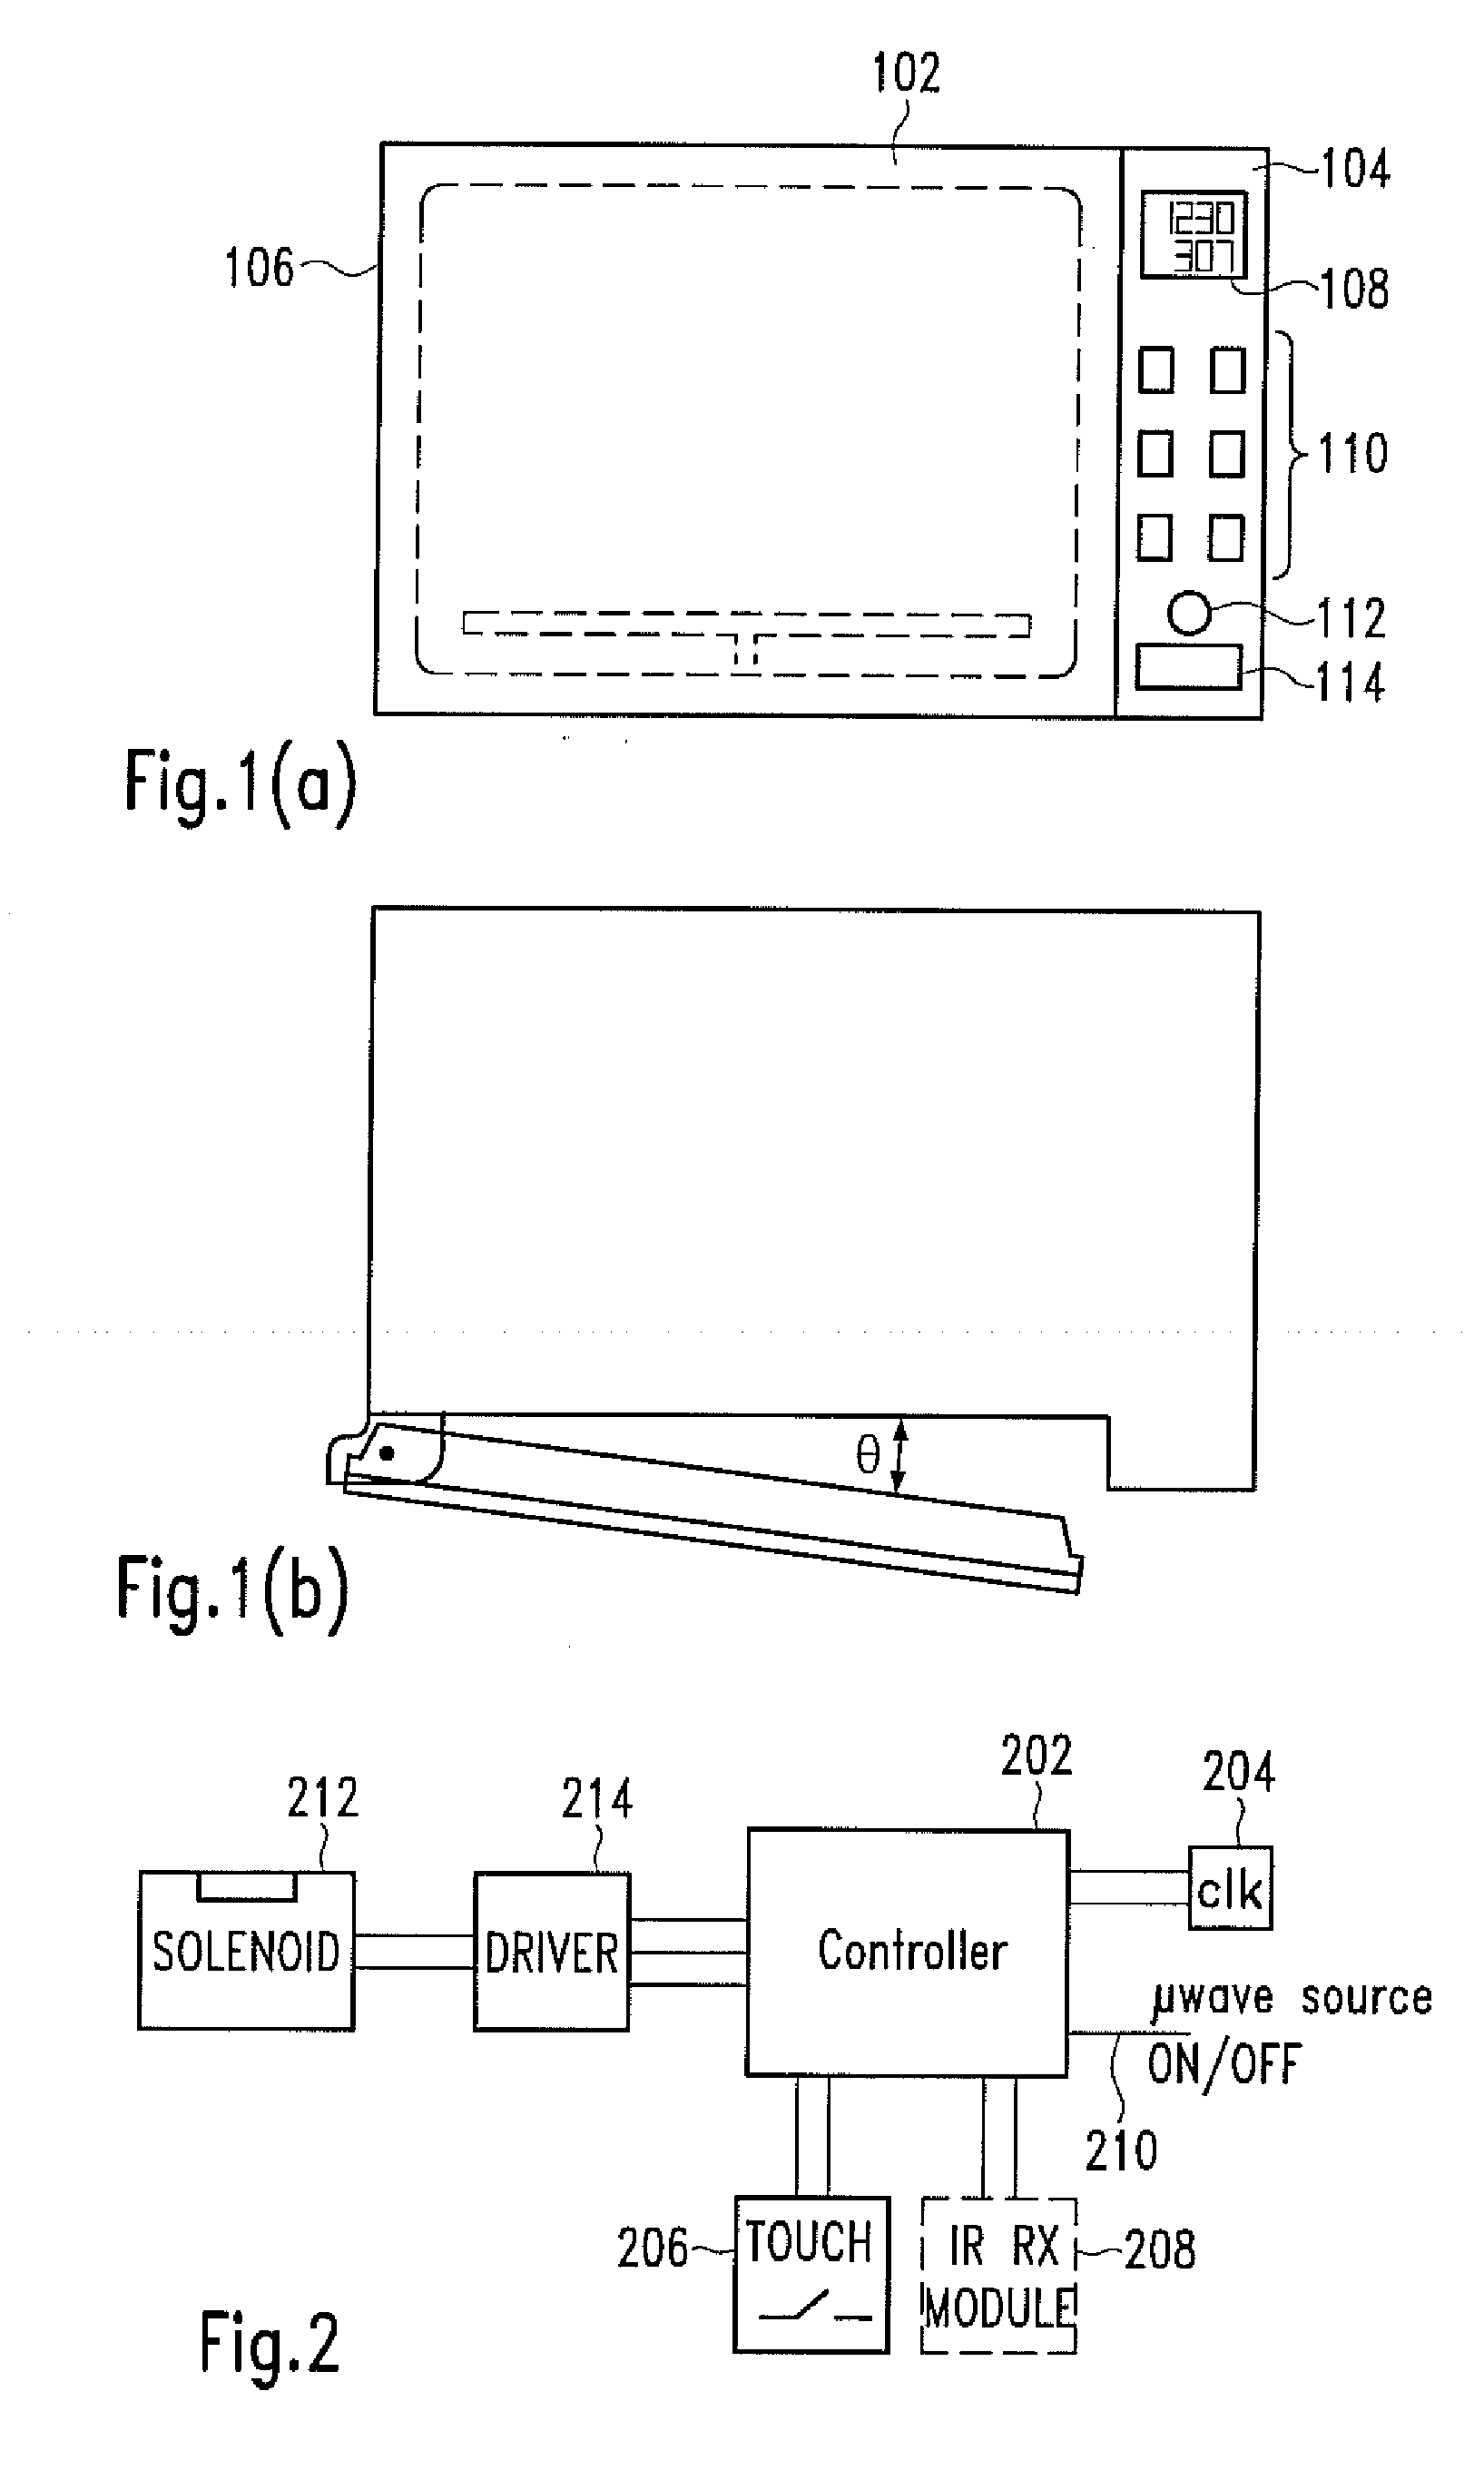 Domestic Appliance with Controlled Door Opening